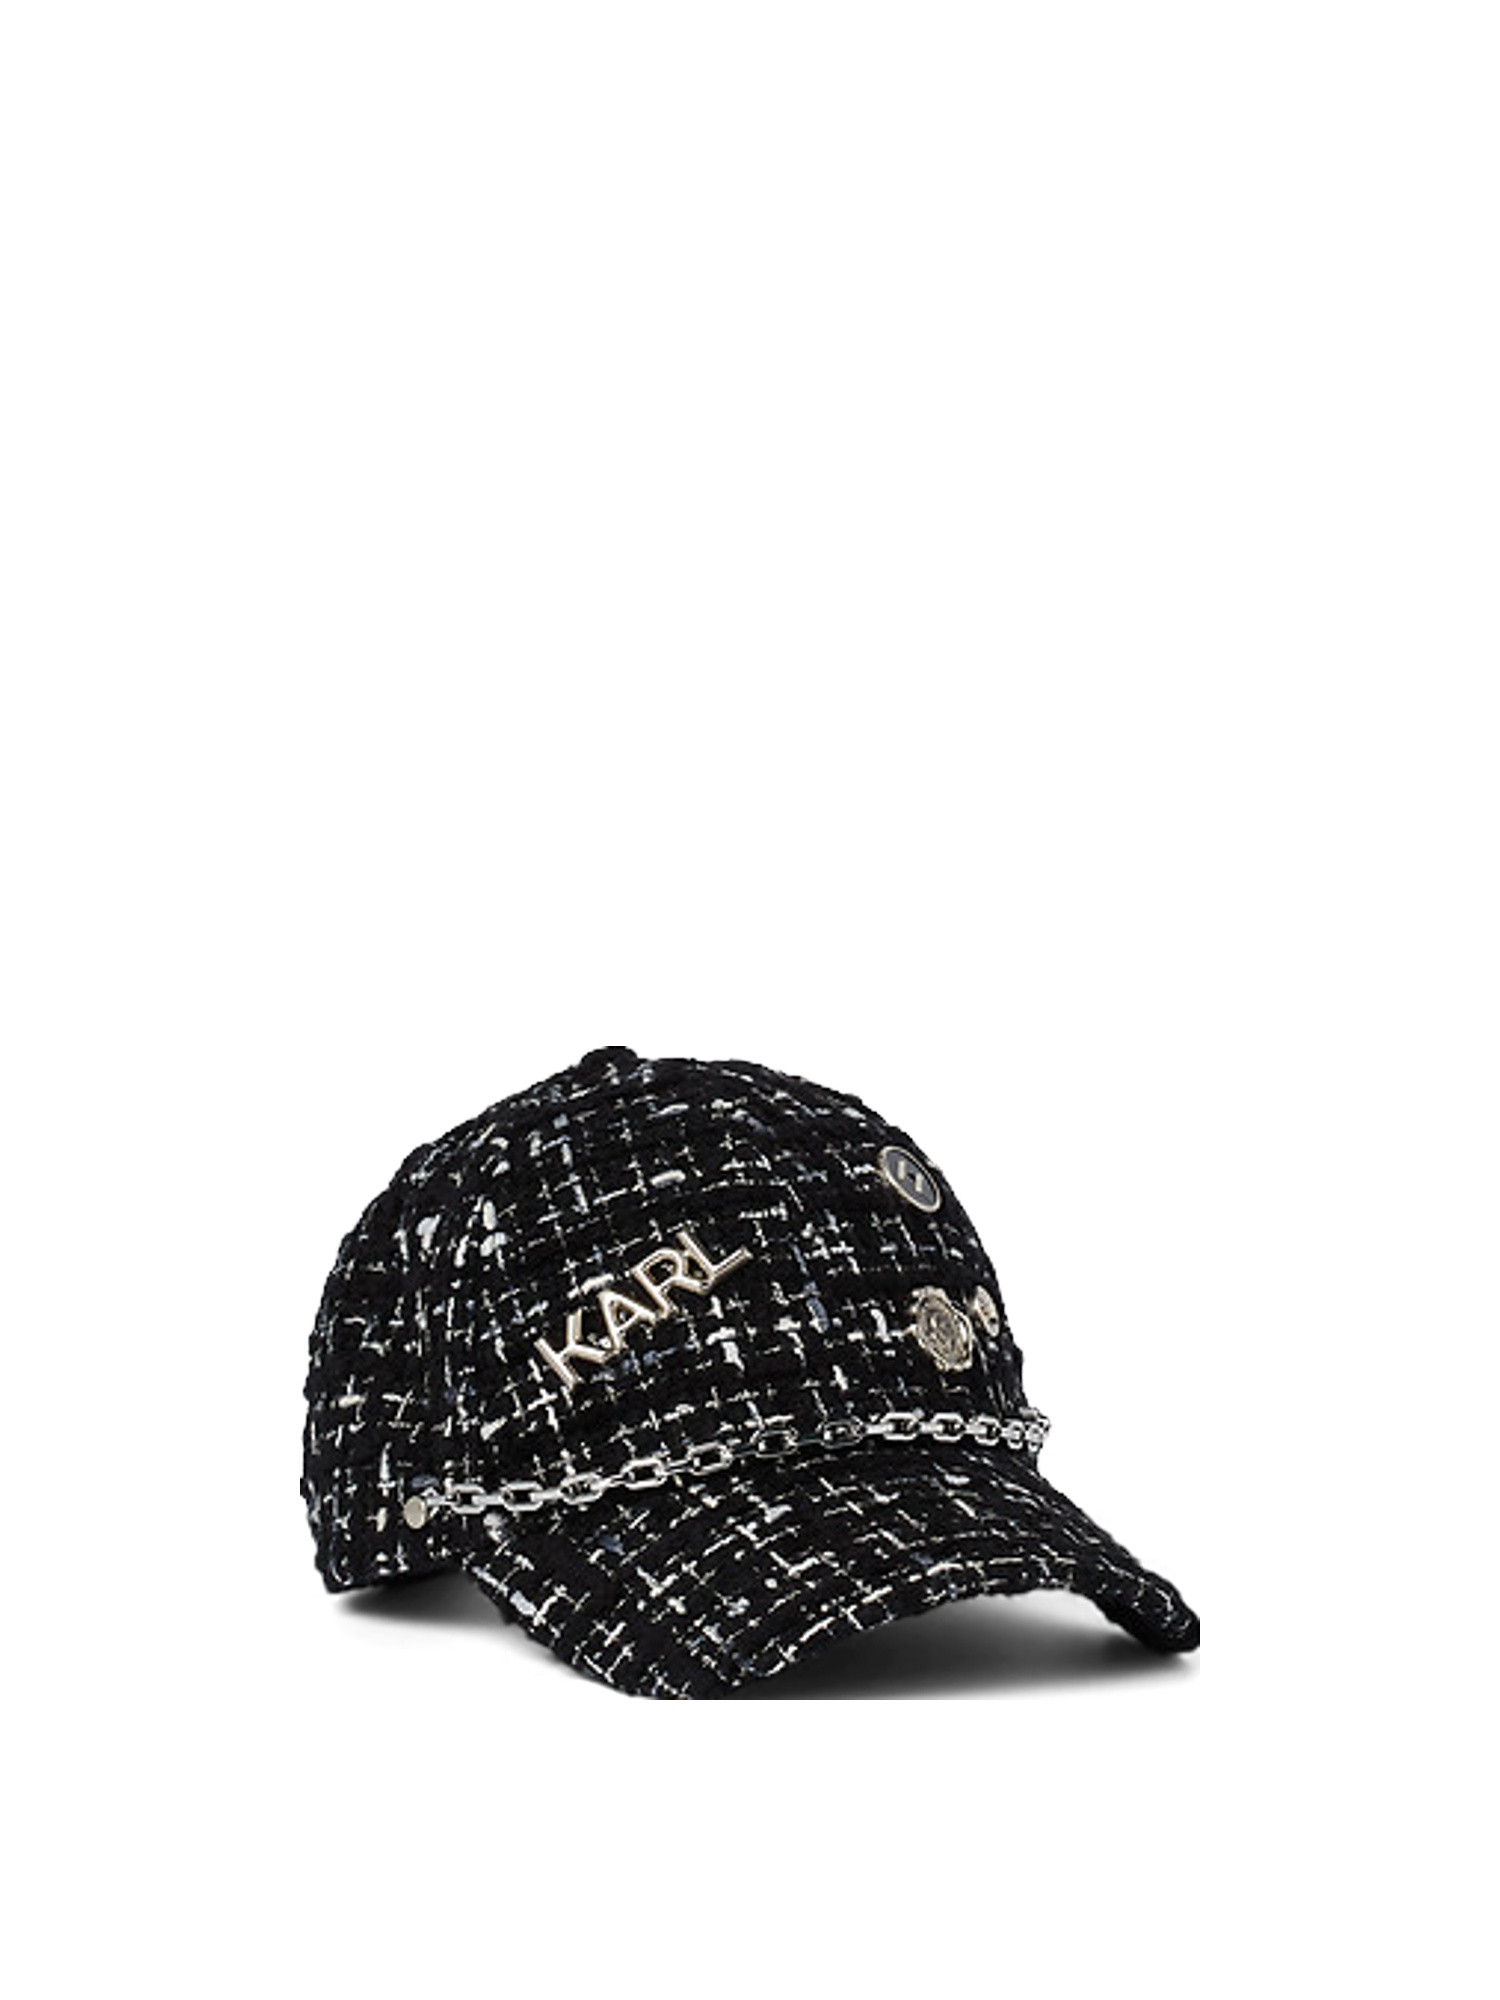 Karl Lagerfeld - K/pins cappello bouclé, Nero, large image number 0